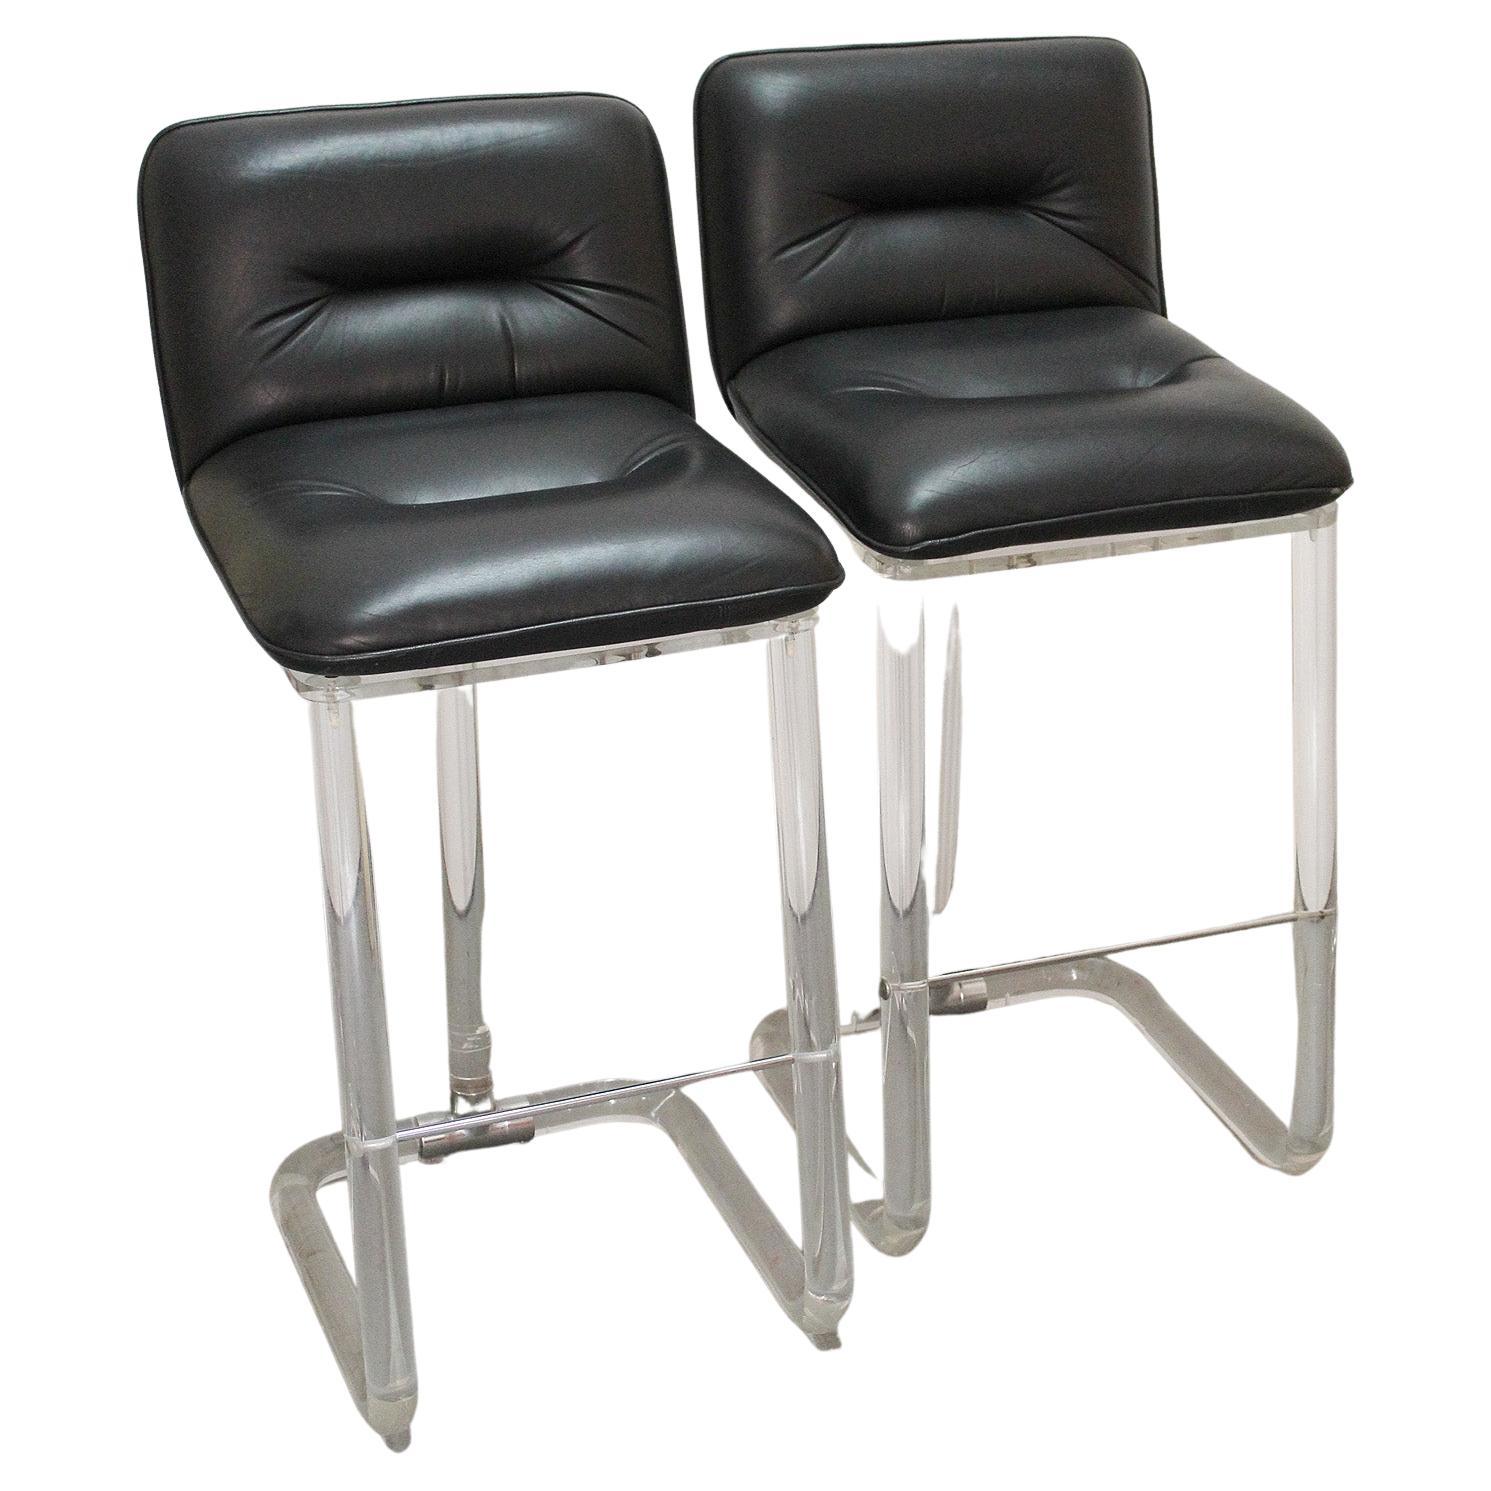 Pair of Lion in Frost Black Leather Swivel Bar Stools